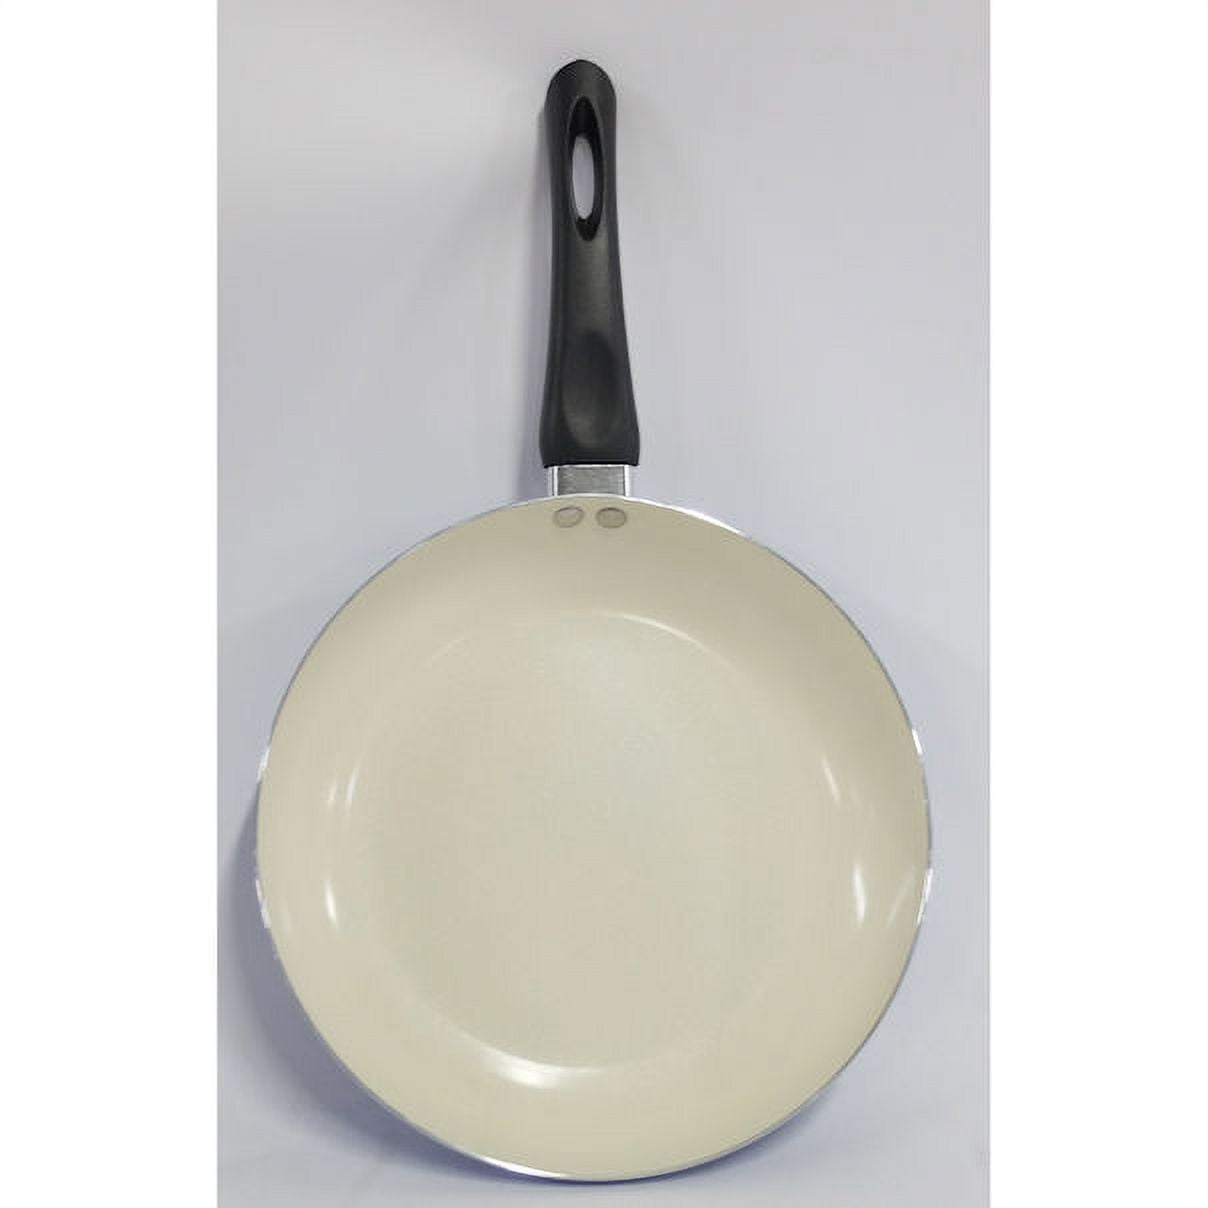 Beautiful 10in Ceramic Non-Stick Fry Pan, White Icing by Drew Barrymore , White Icing